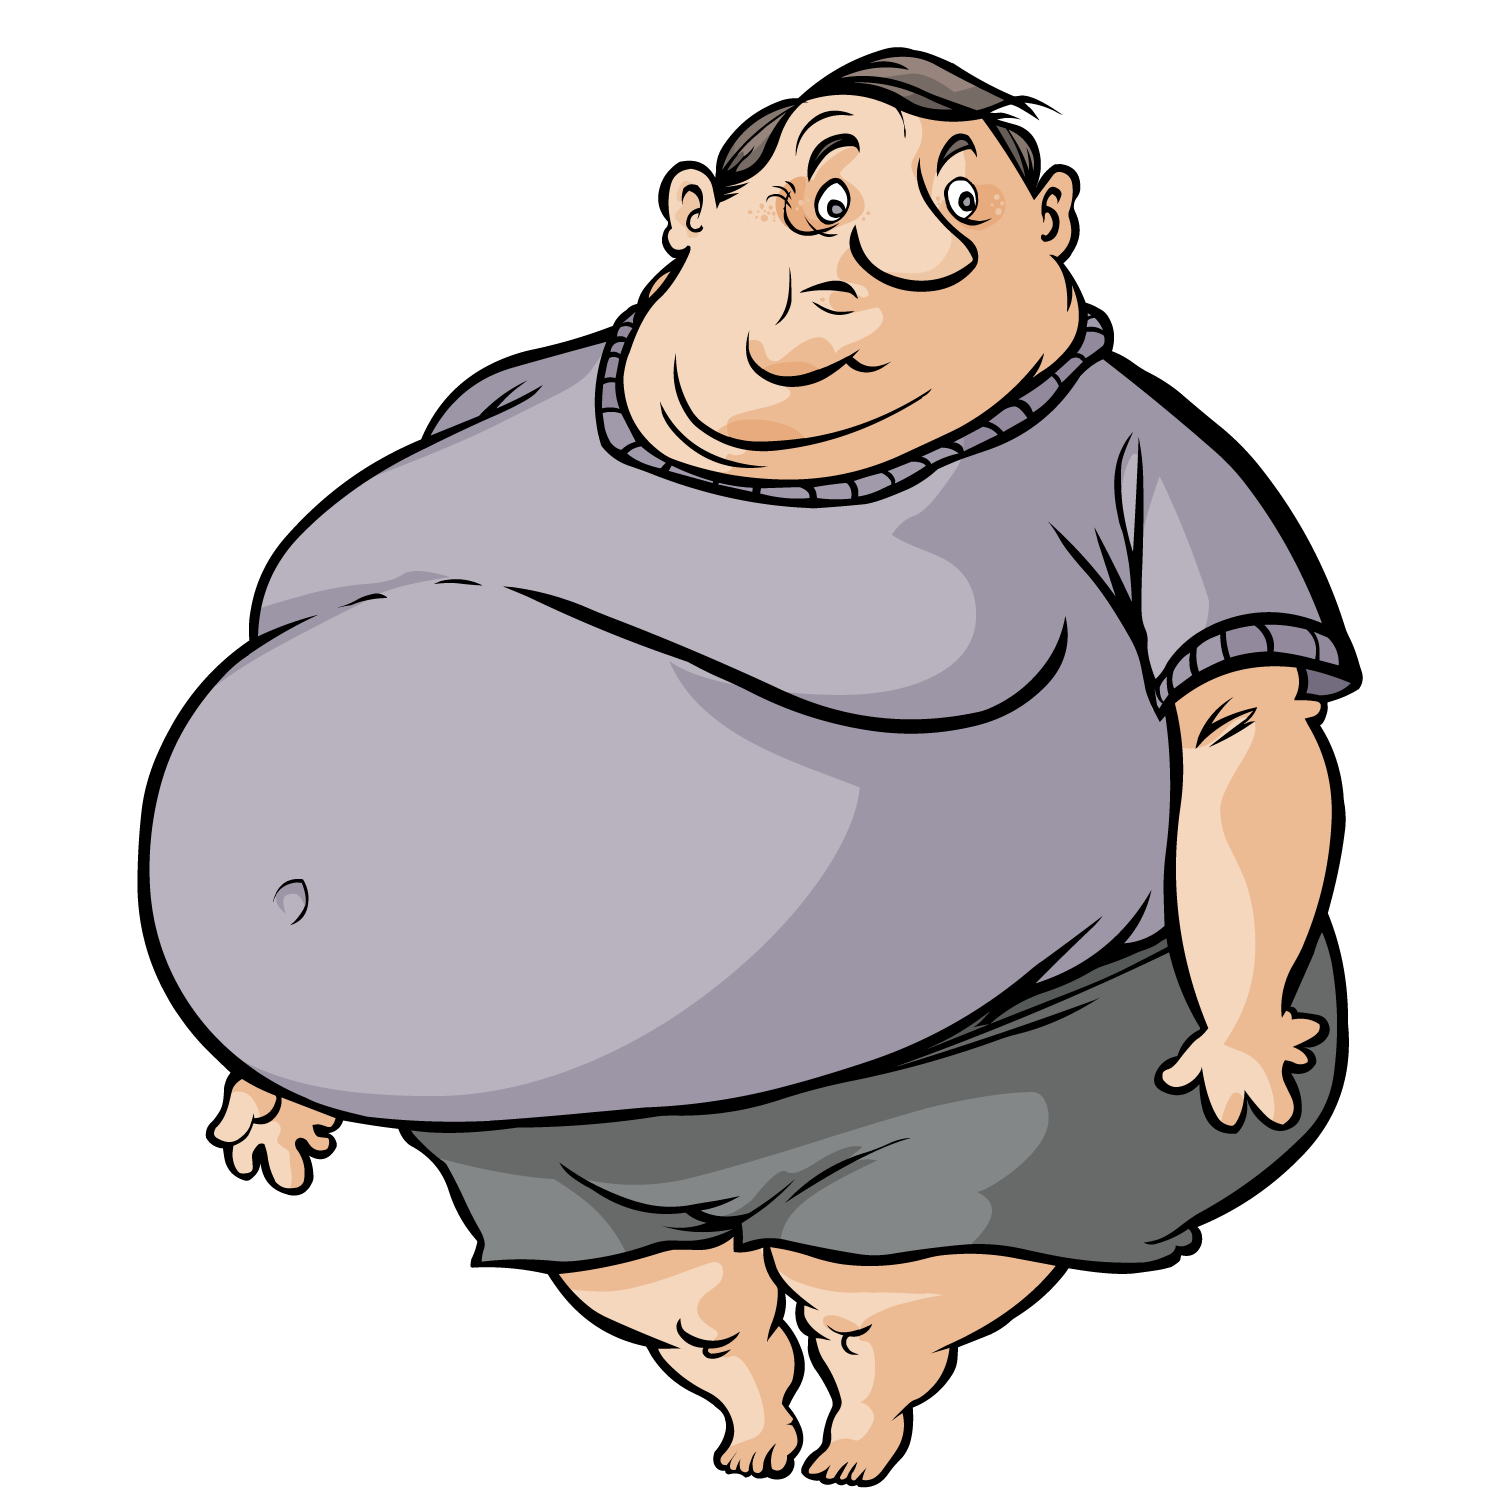 Download Clipart Icon - Cute Cartoon Fat Man Free Transparent Image HQ.